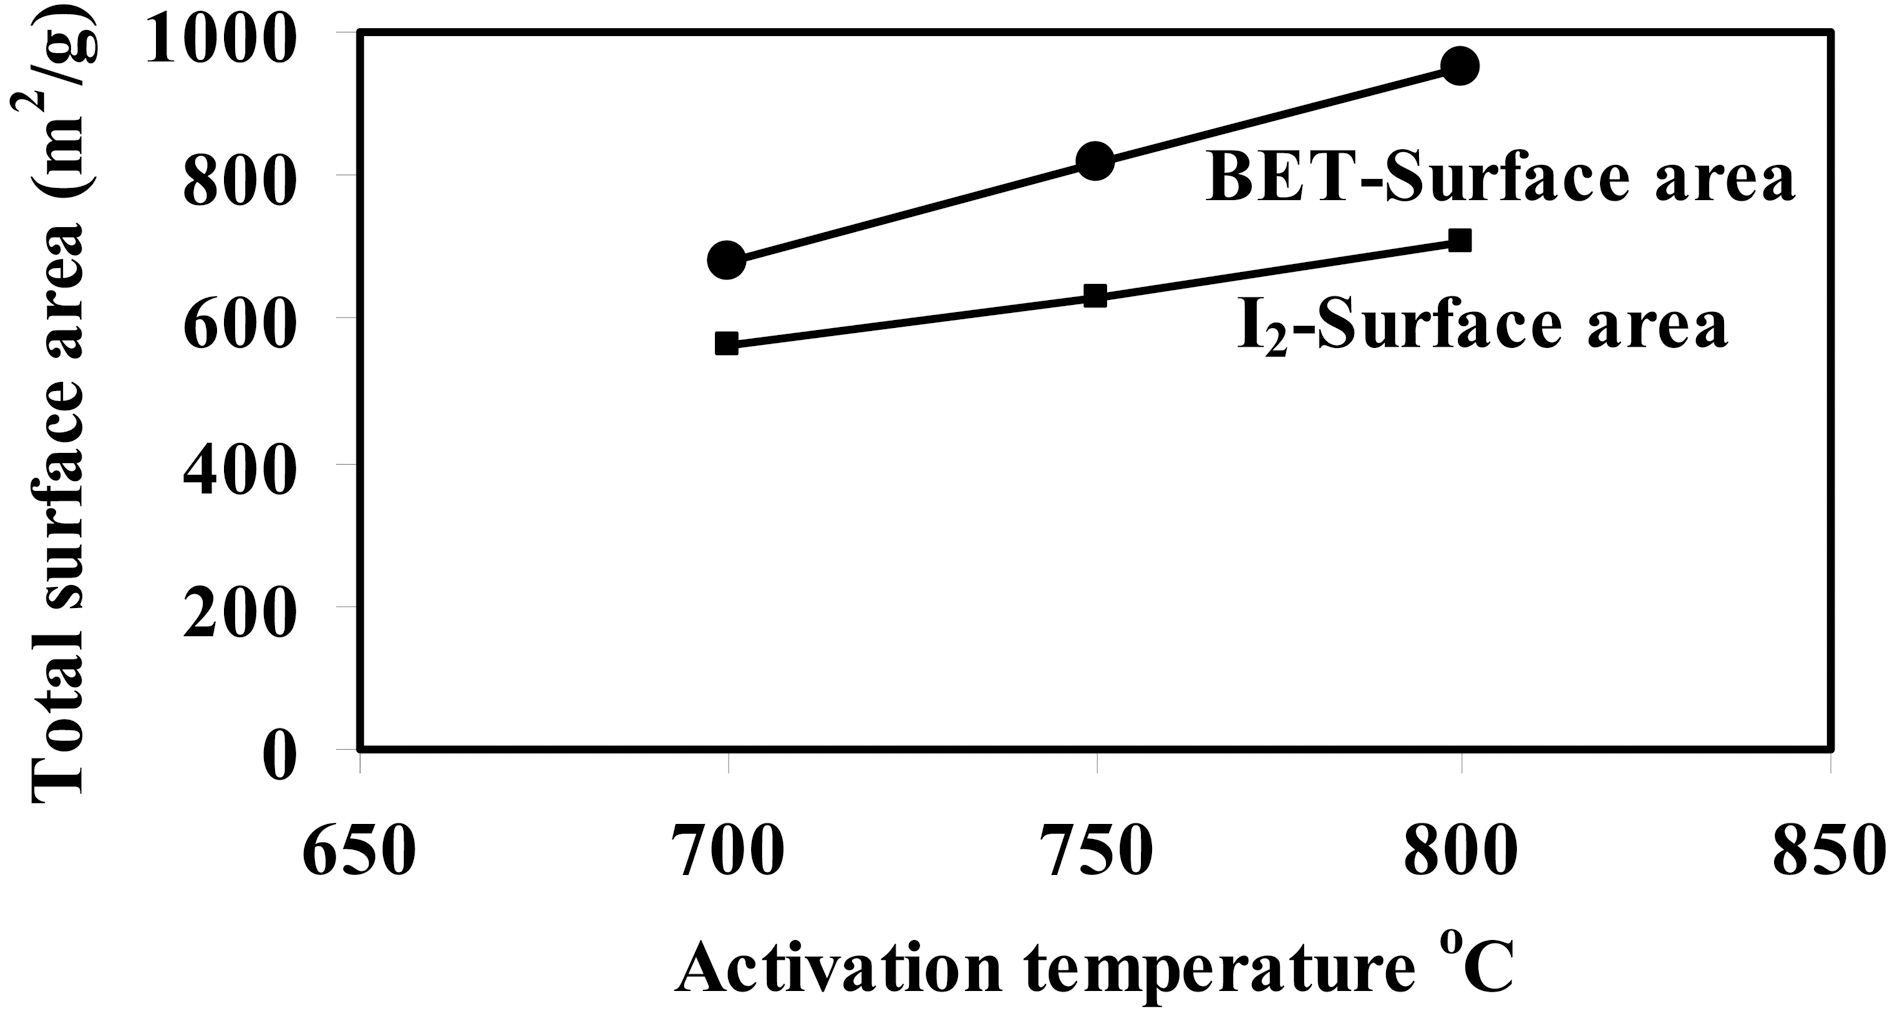 Relationship between activation temperature (700~800oC) with a ratio of 1:1 and BET-surface area and iodine coverage in m2/g.